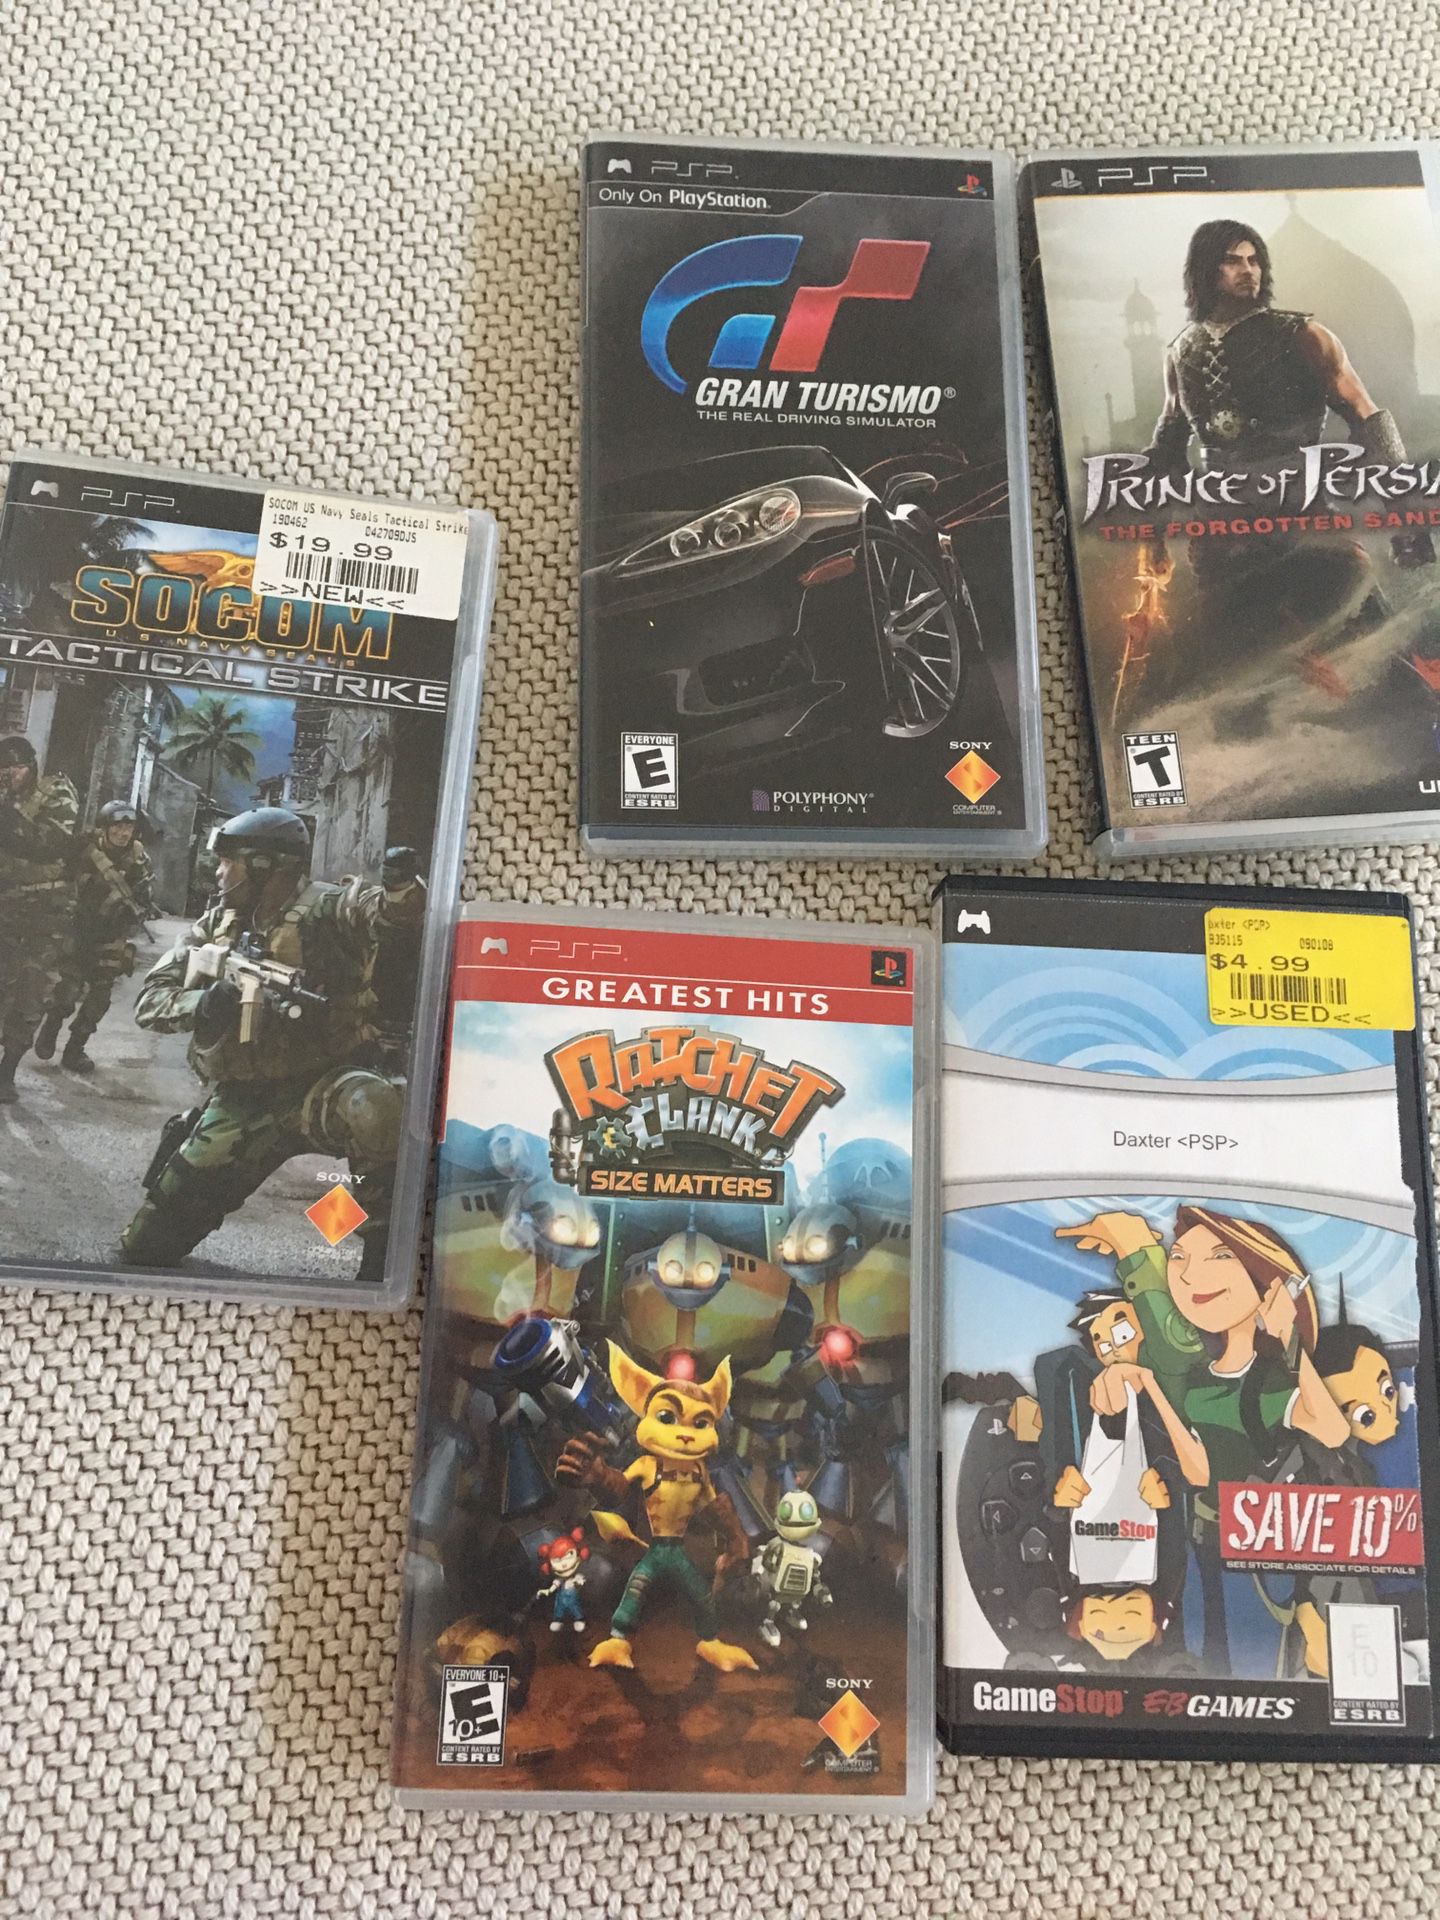 Psp games various $3 and up